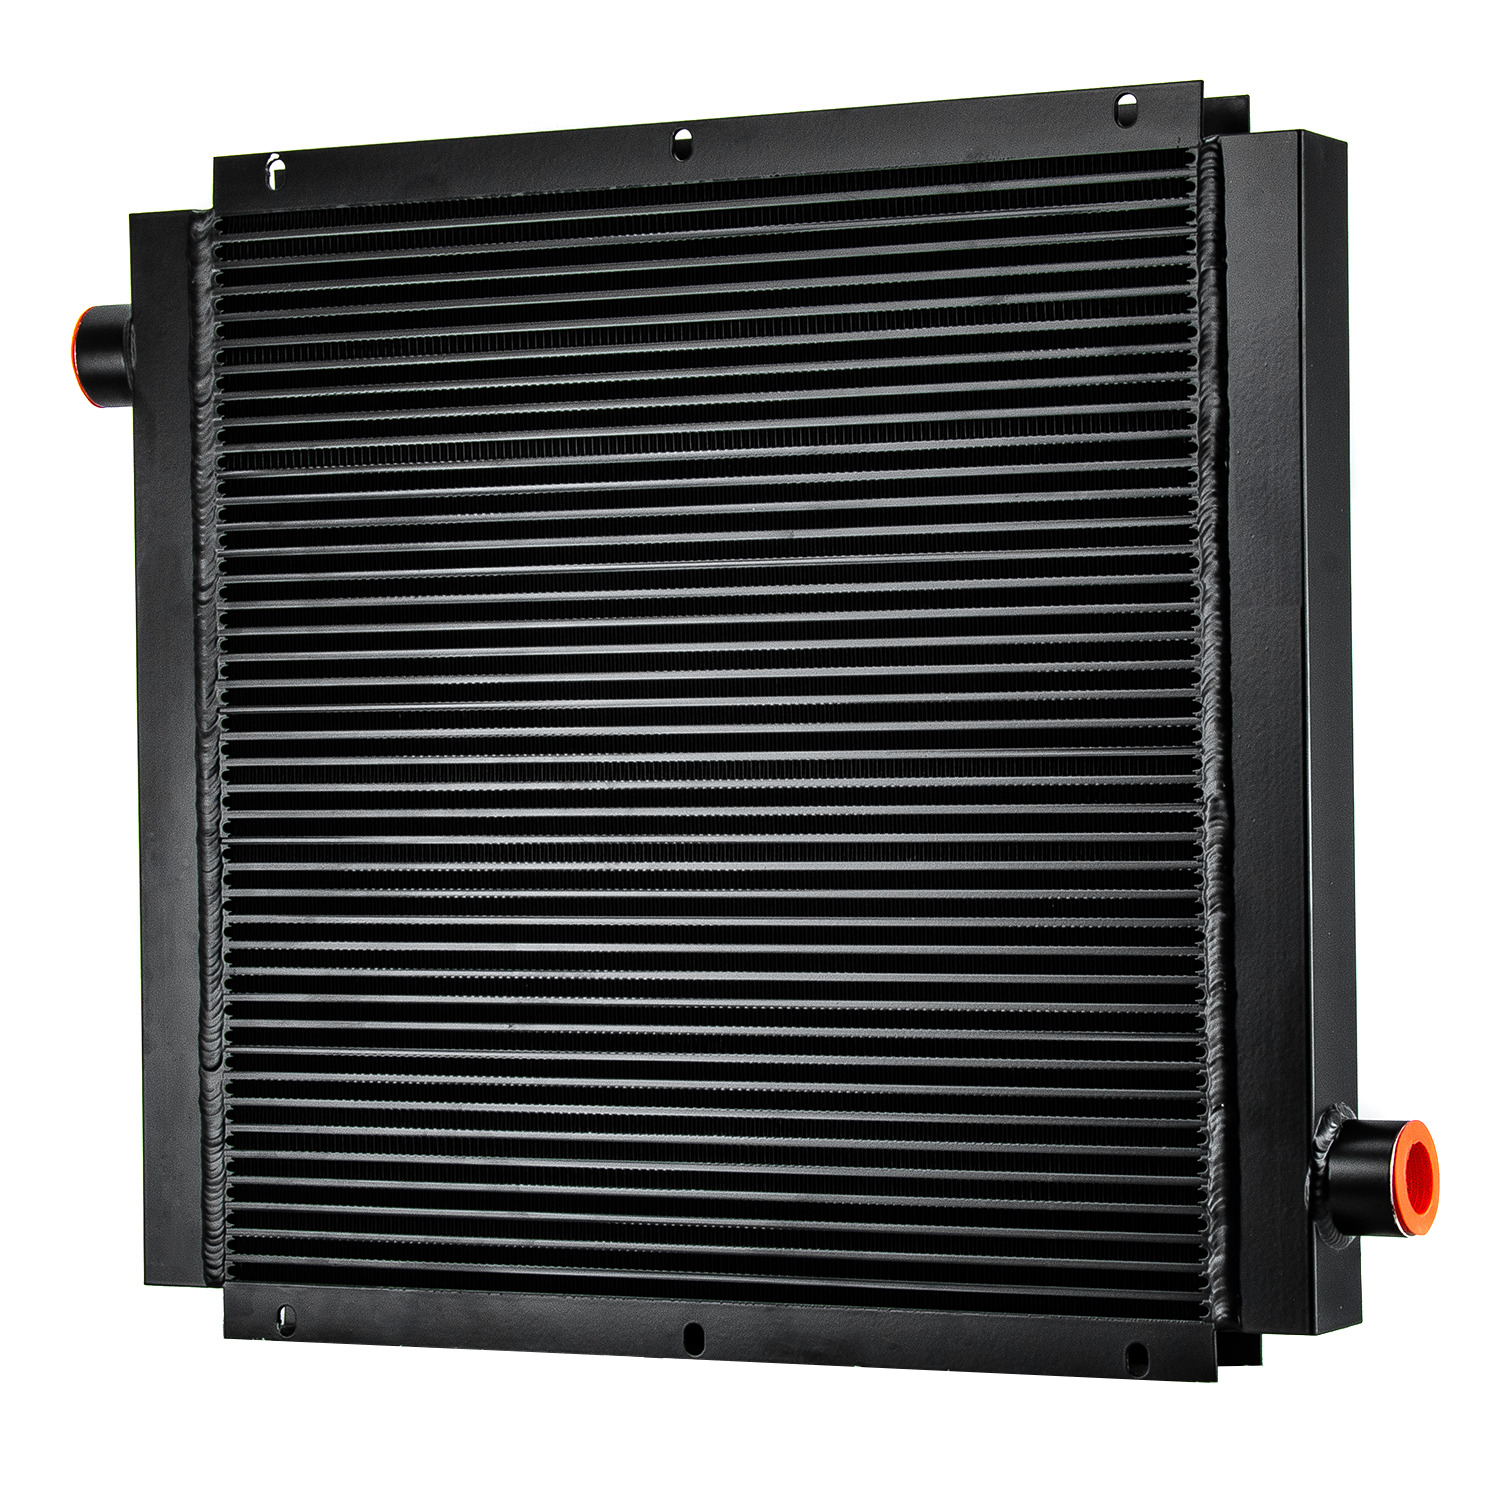 New Mobile Hydraulic Oil Cooler 0-120 GPM 90HP Fit Industrial Cooling System